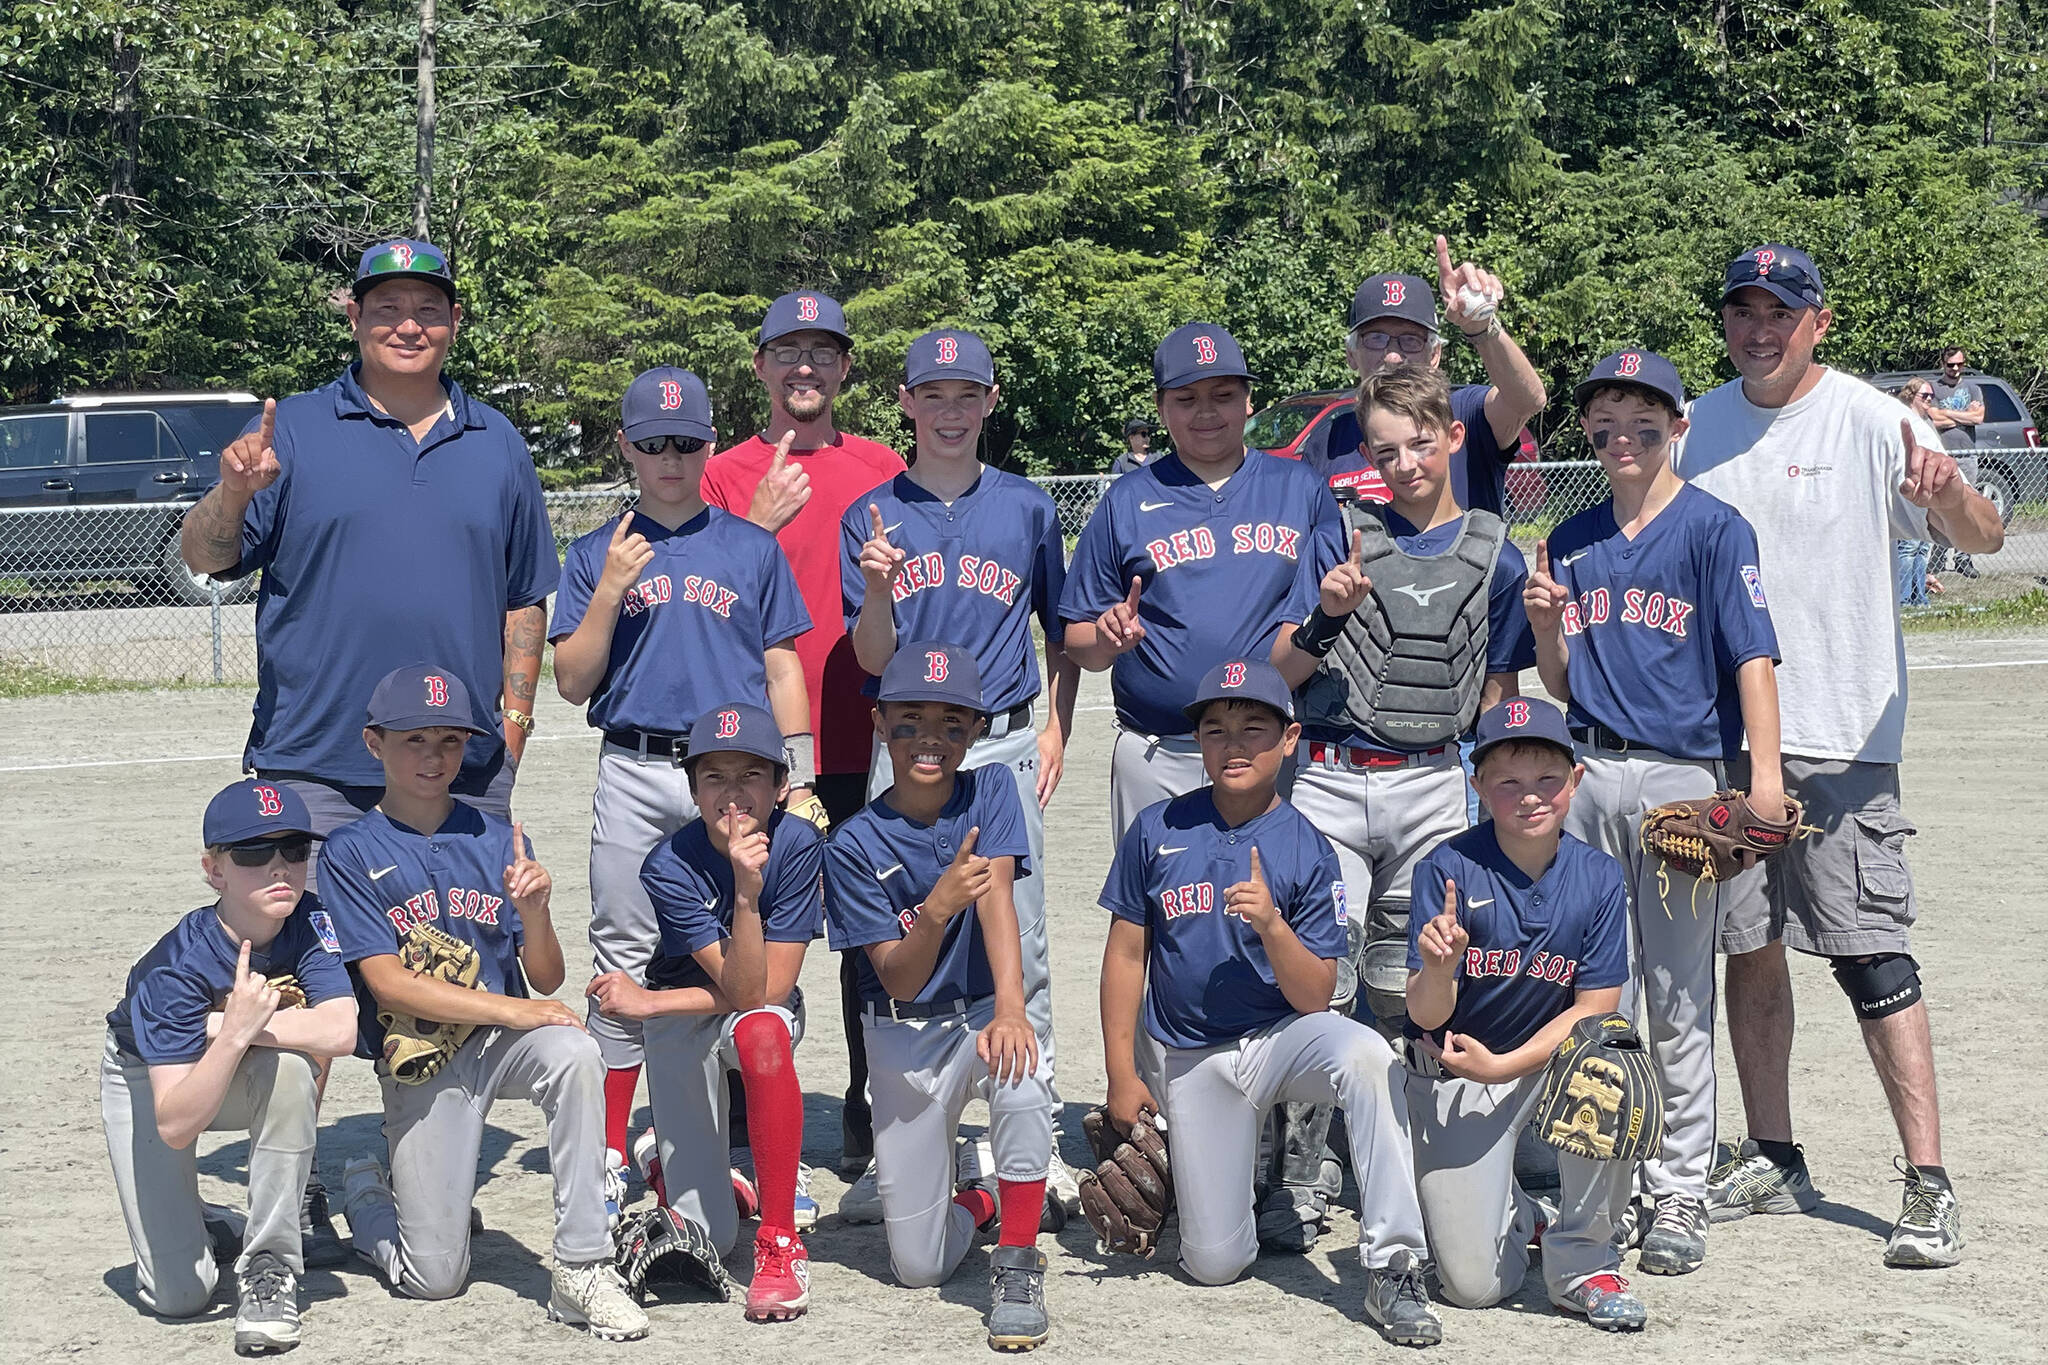 Juneau Pizza Red Sox best Ike's Fuel White Sox for Majors Division title.